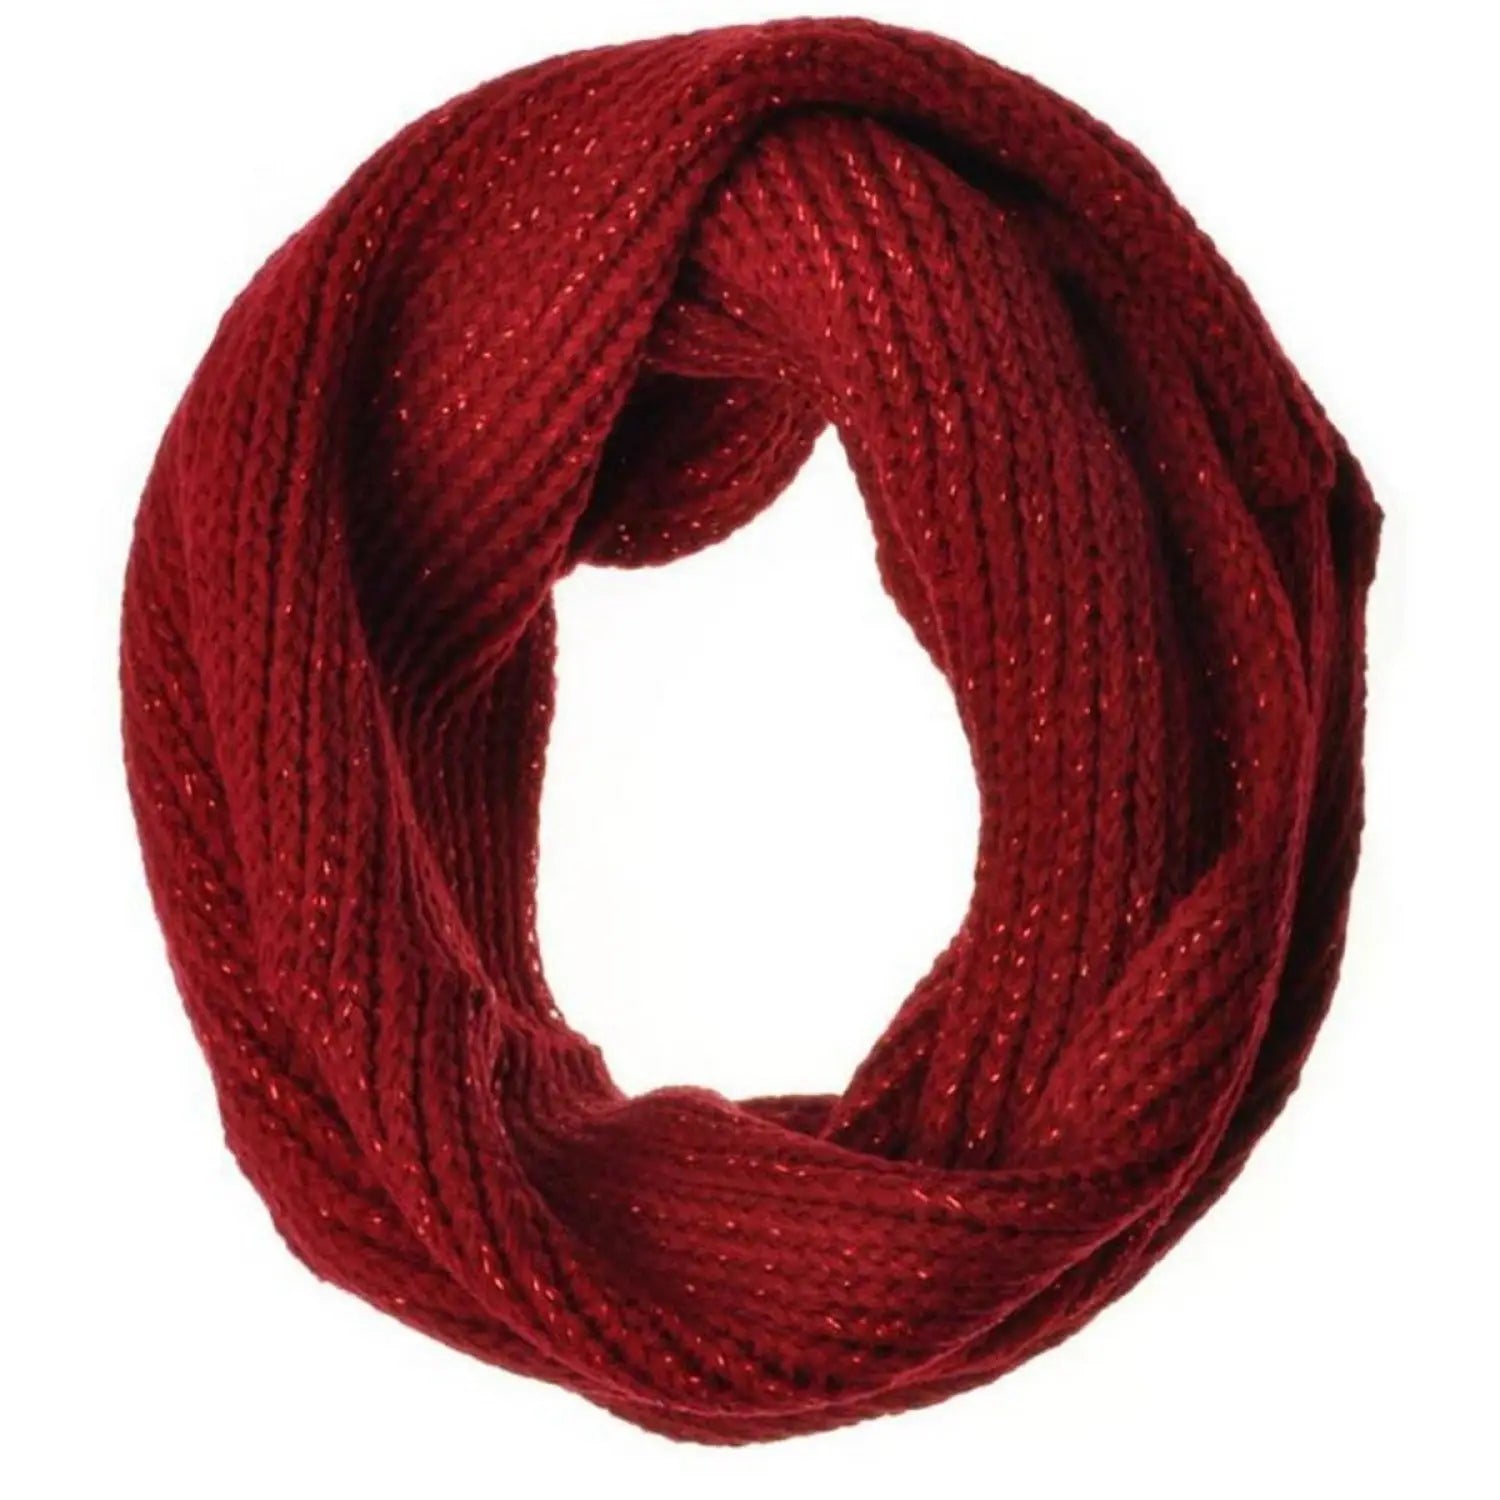 Red cable knit scarf displayed in Cosy Chunky Knit Snood for warm autumn & winter.